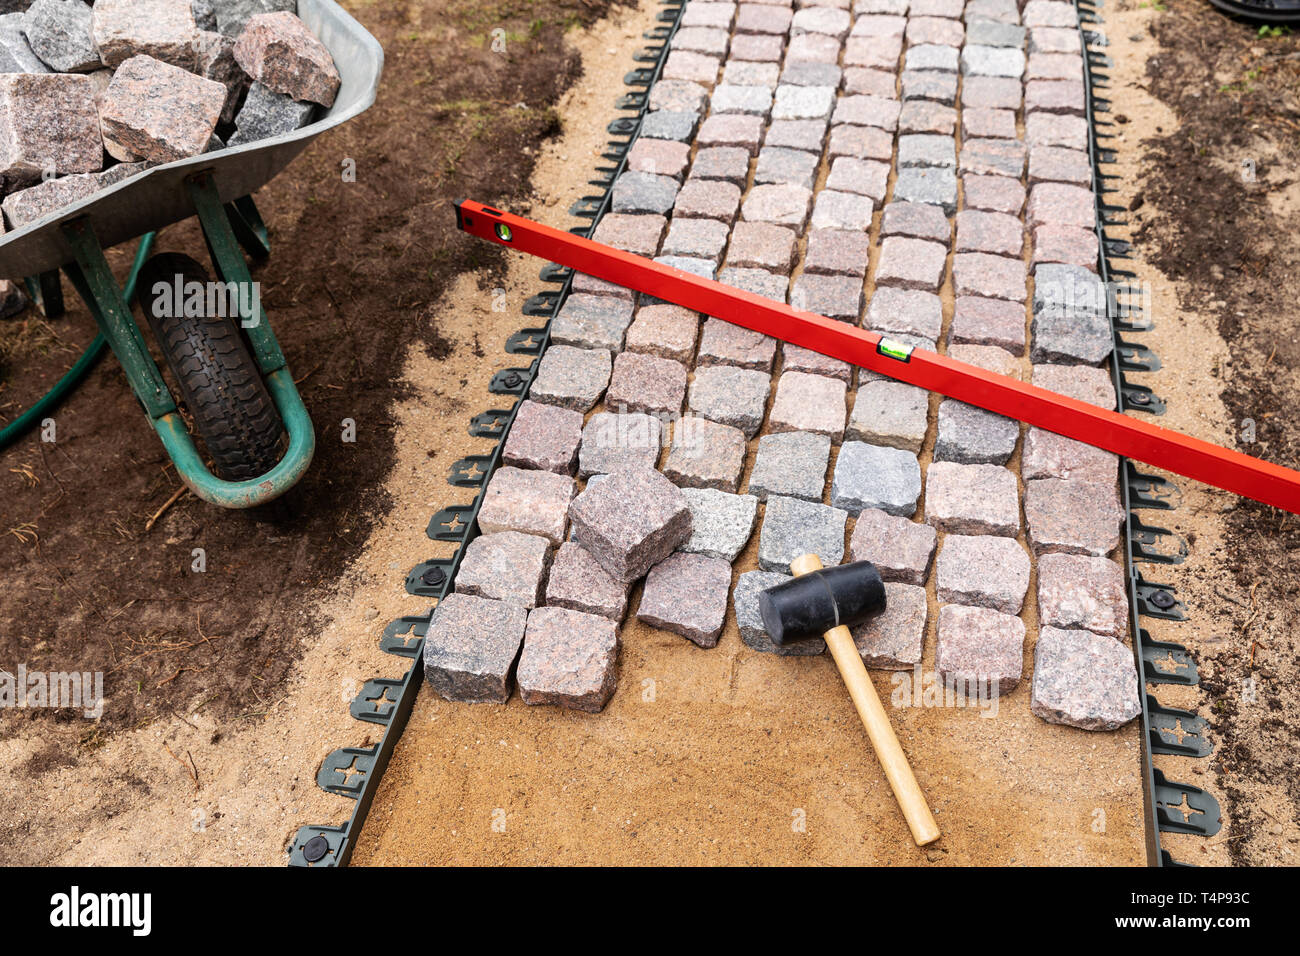 landscaping and garden services - granite cobblestone walkway construction Stock Photo